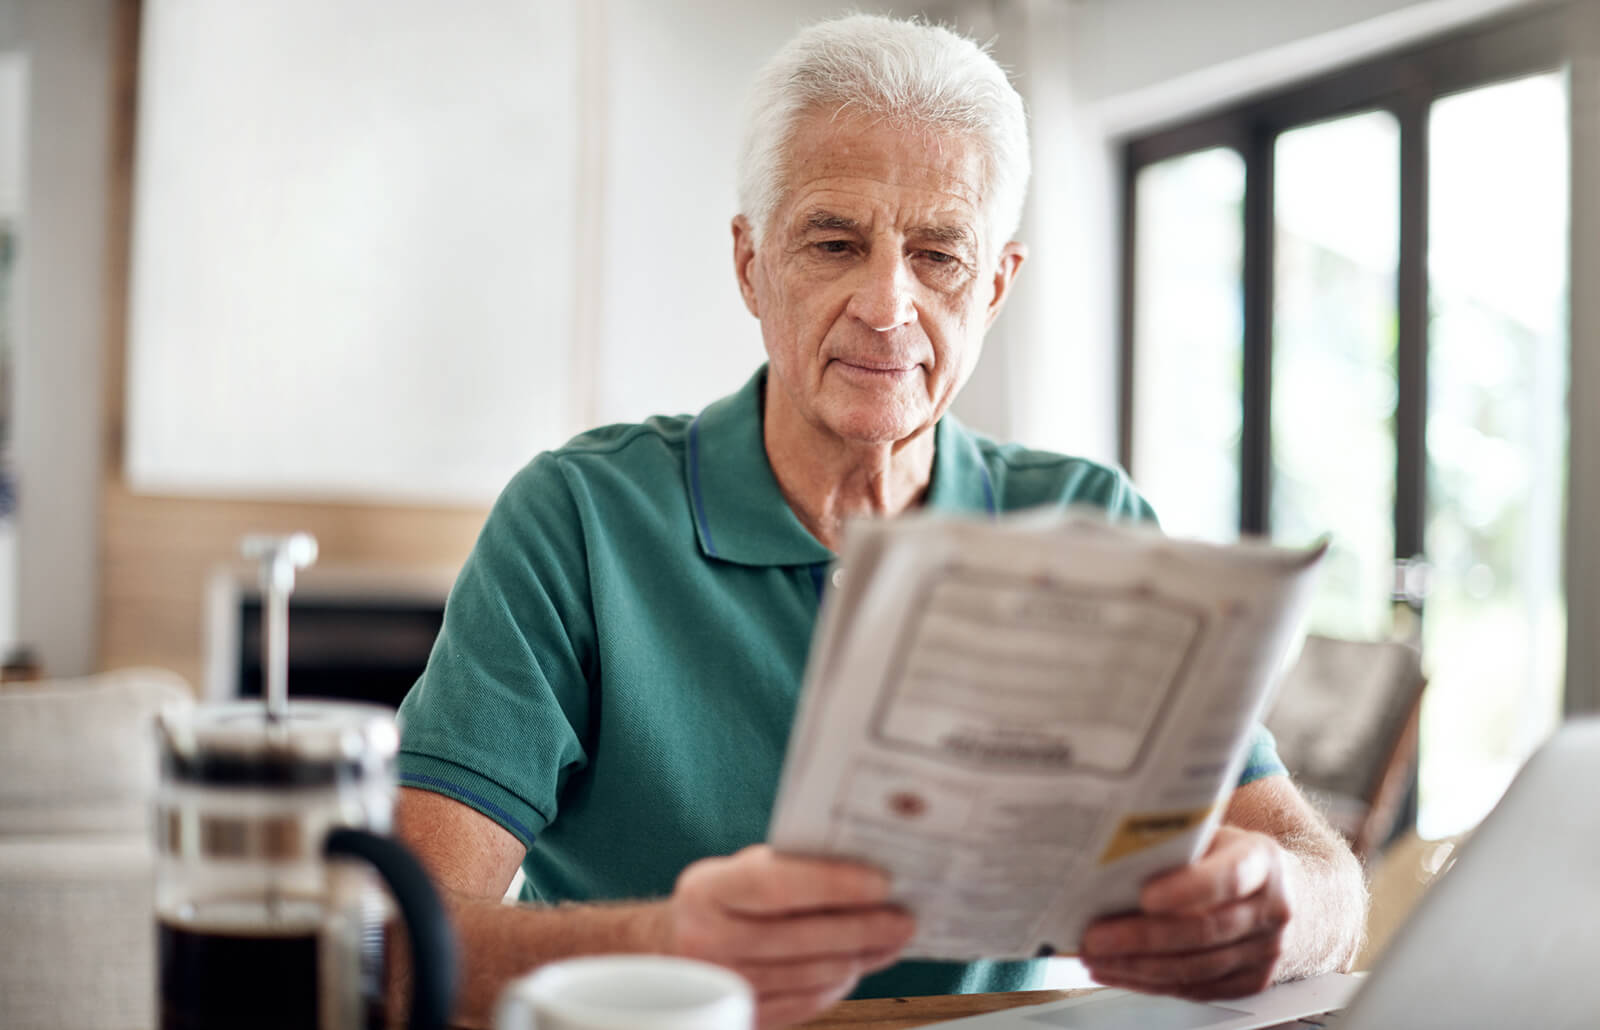 Man reading an obituary in a newspaper in the morning